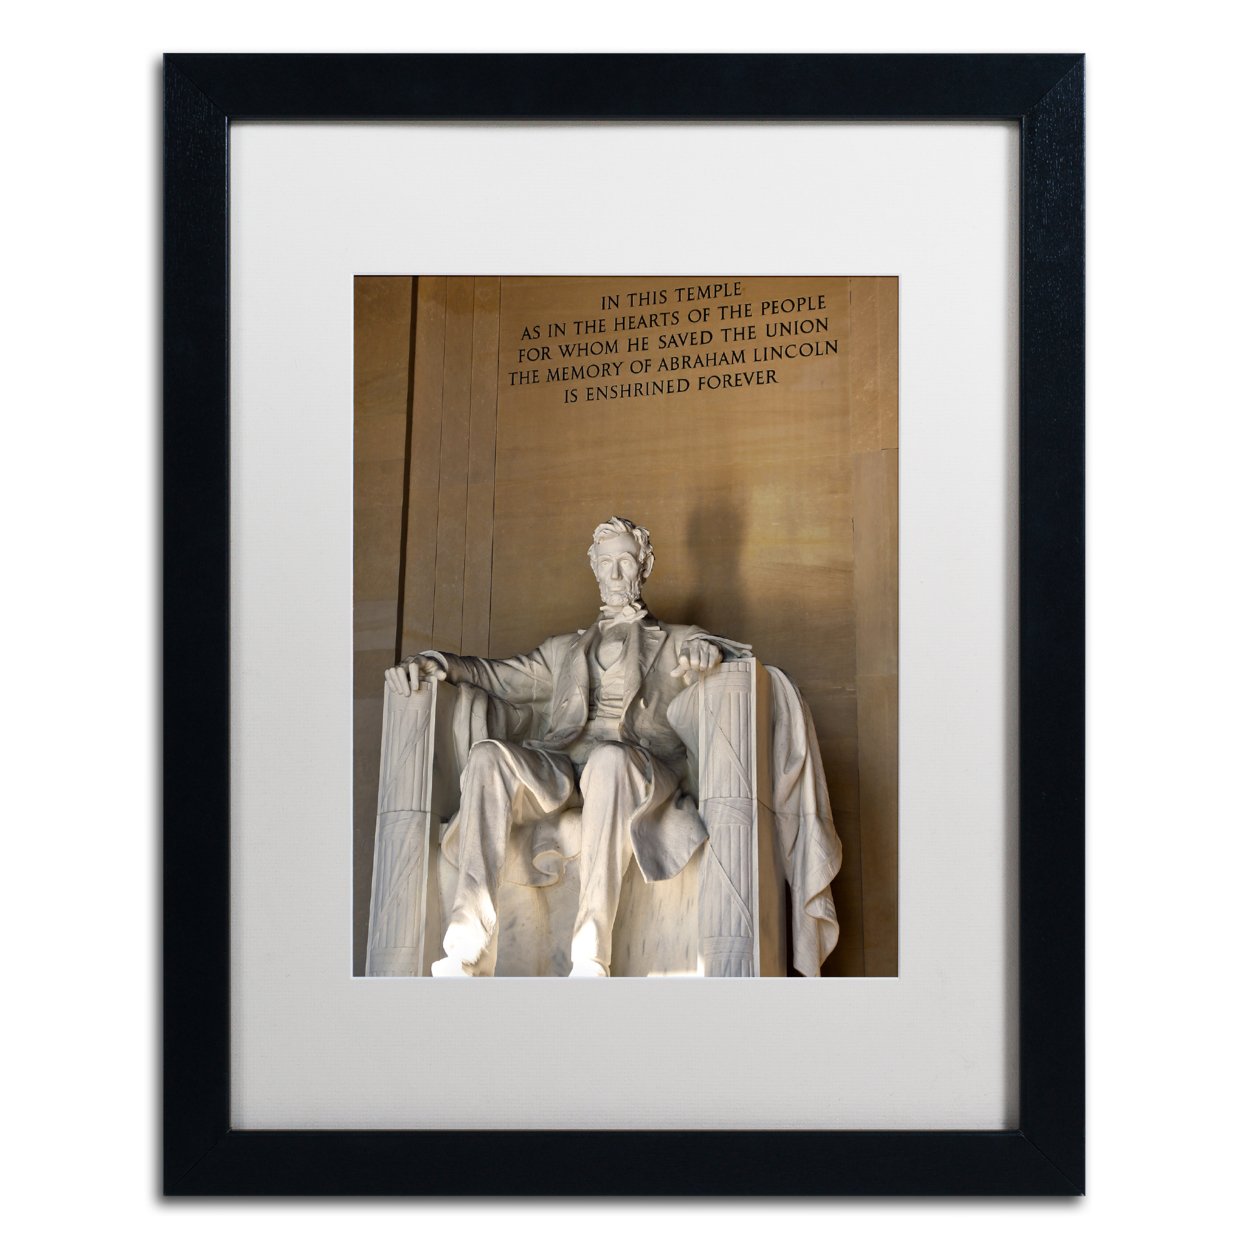 CATeyes 'Lincoln Memorial 2' Black Wooden Framed Art 18 X 22 Inches